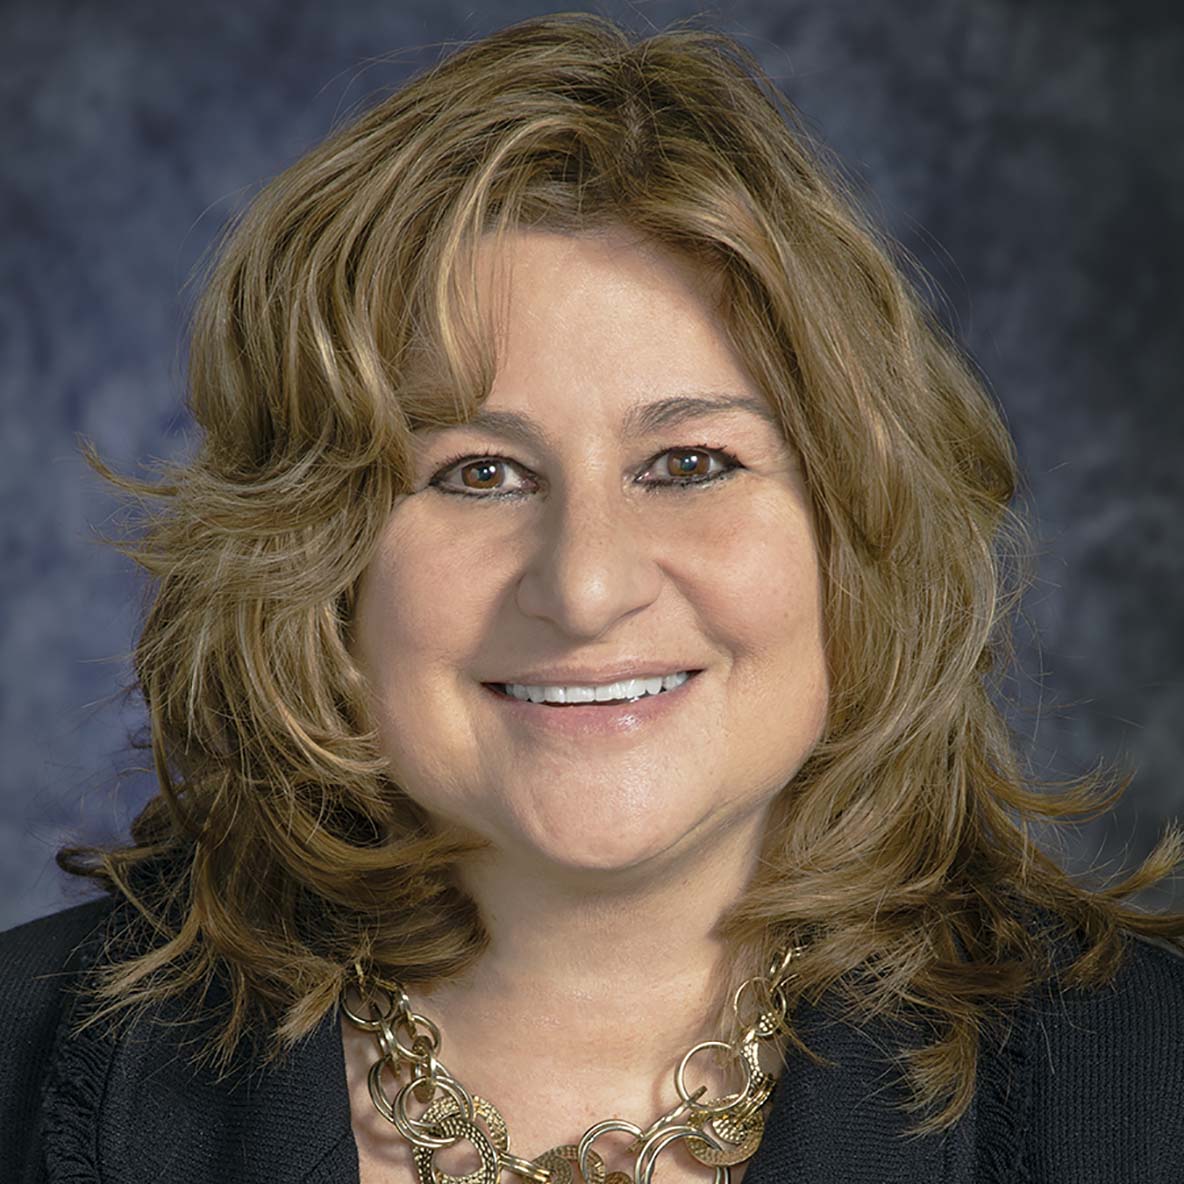  Cheryl Capps, Senior Vice President and Chief Supply Chain Officer